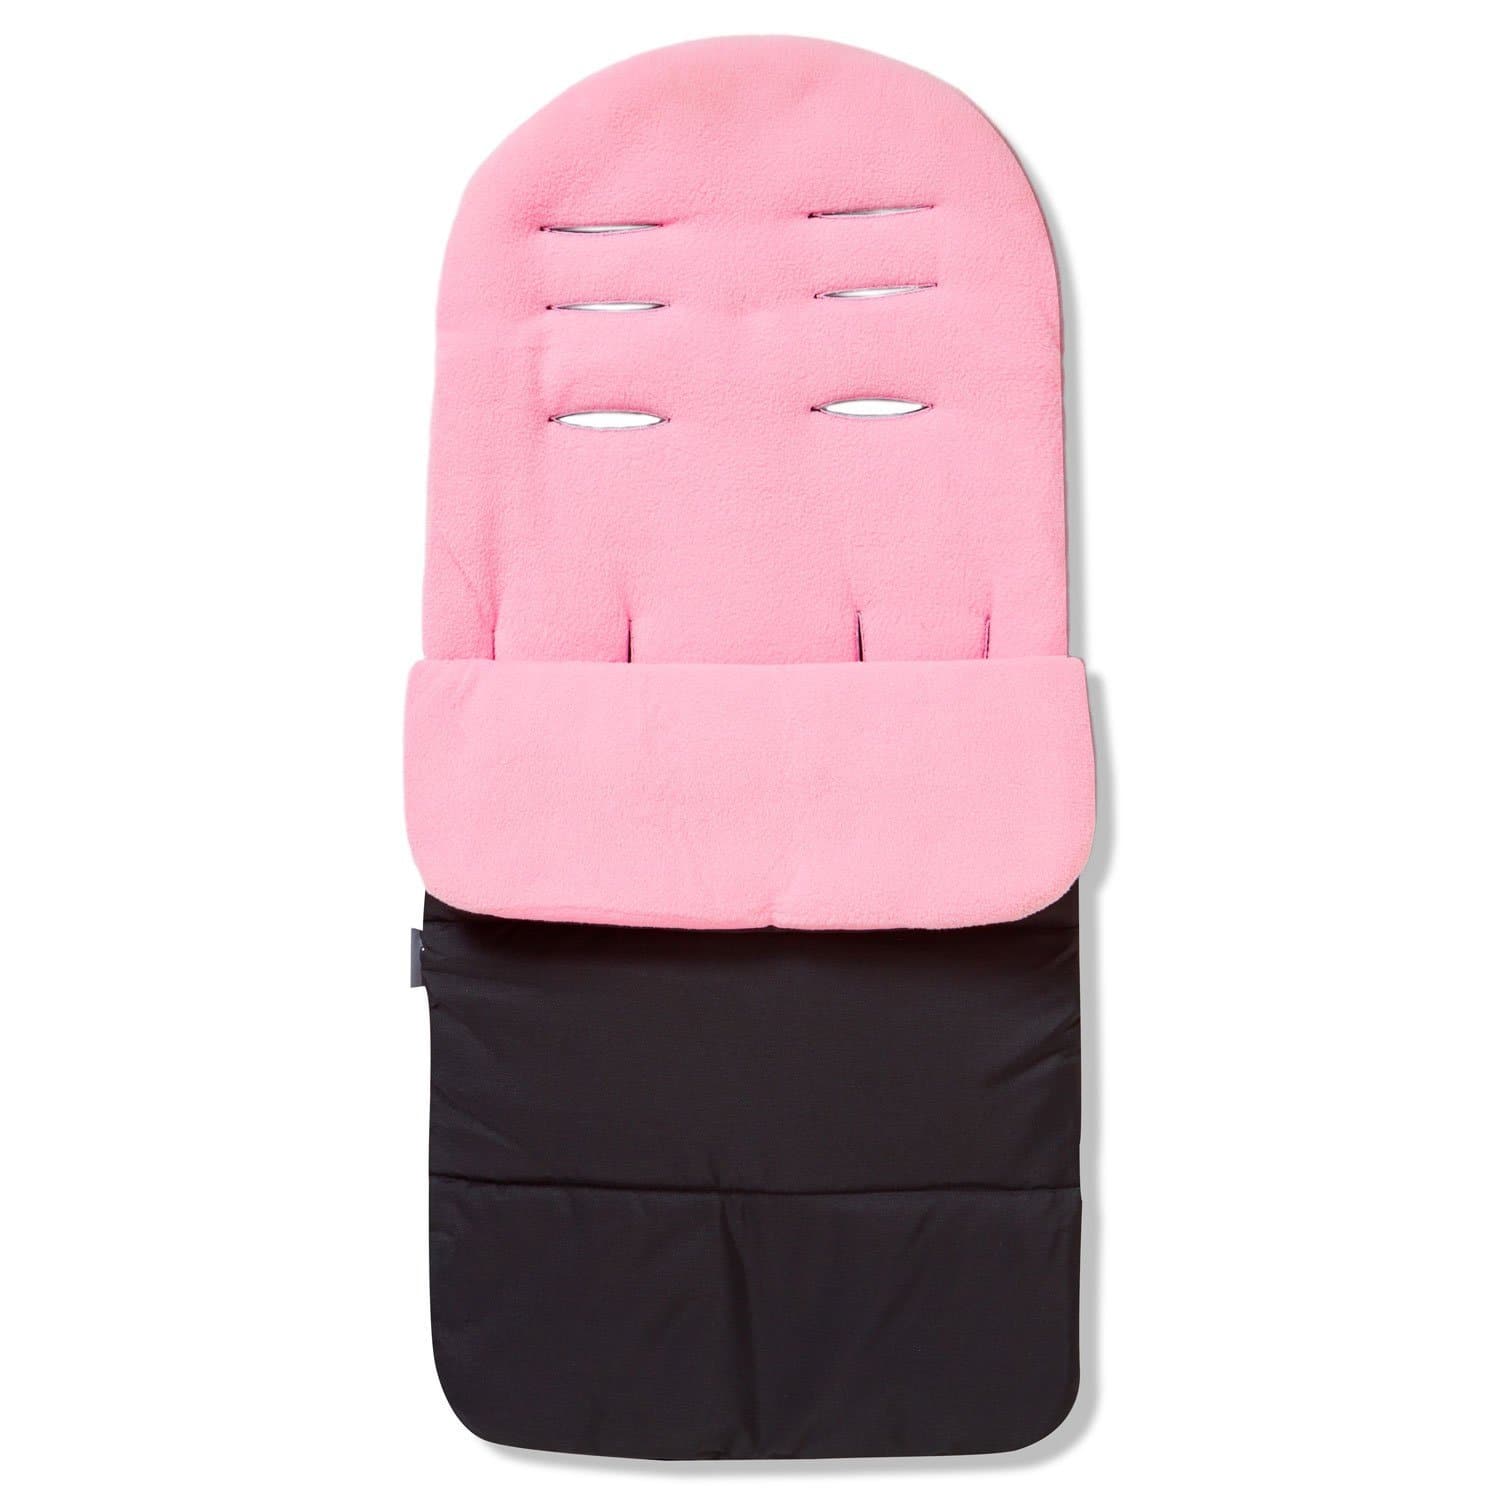 Premium Footmuff / Cosy Toes Compatible with Combi - Candy Pink / Fits All Models | For Your Little One